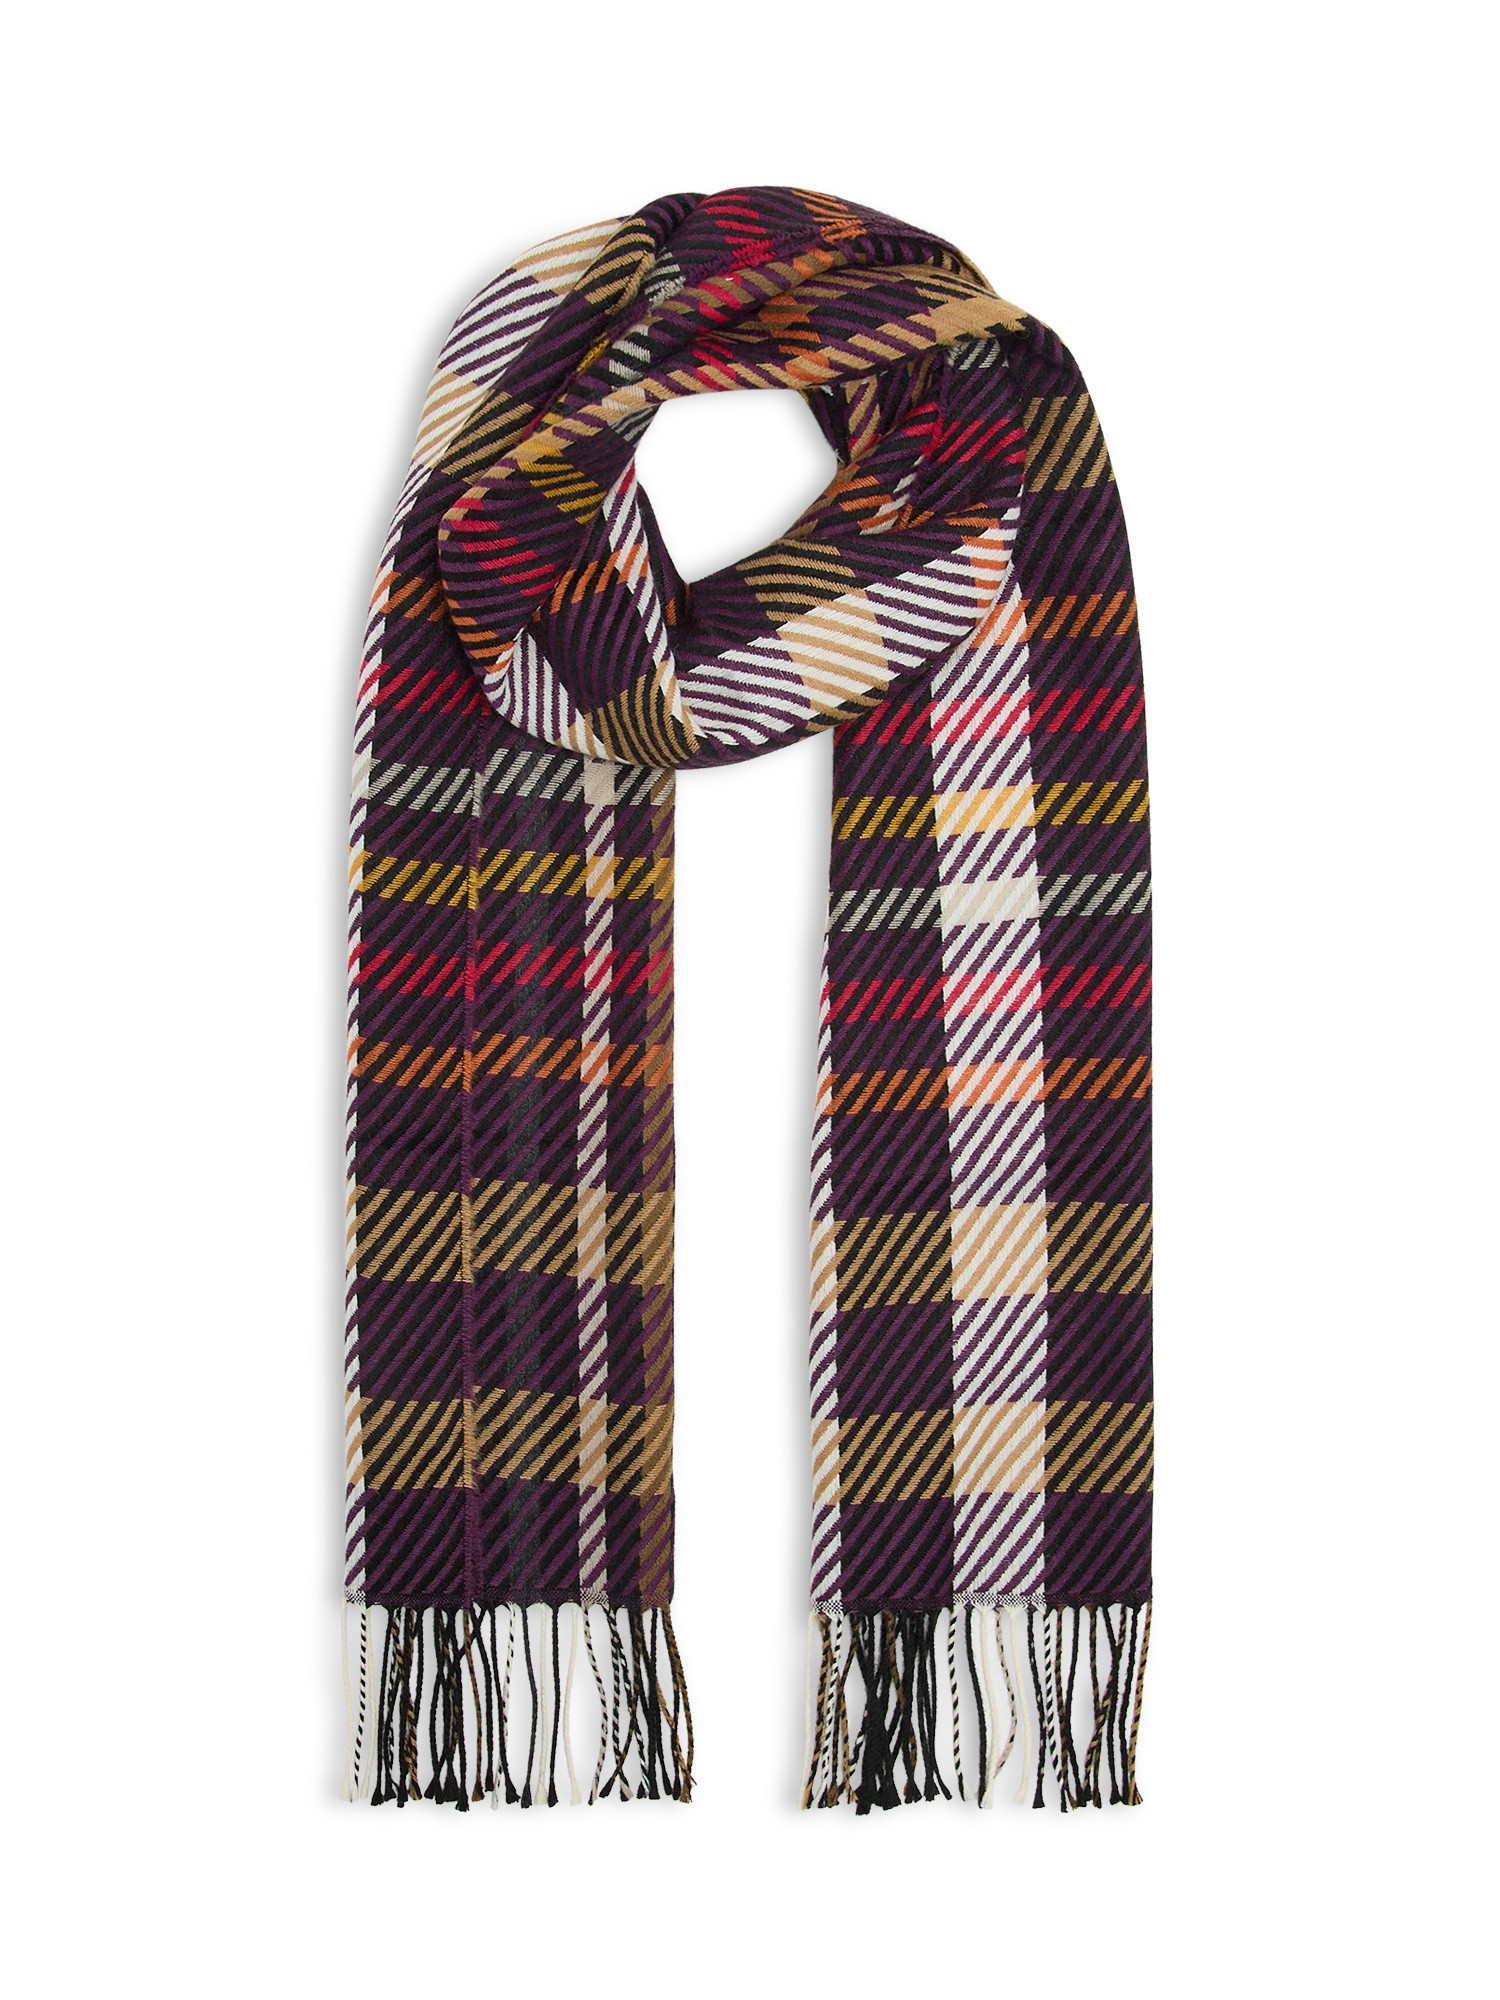 Koan - Plaid and striped stole, Multicolor, large image number 0